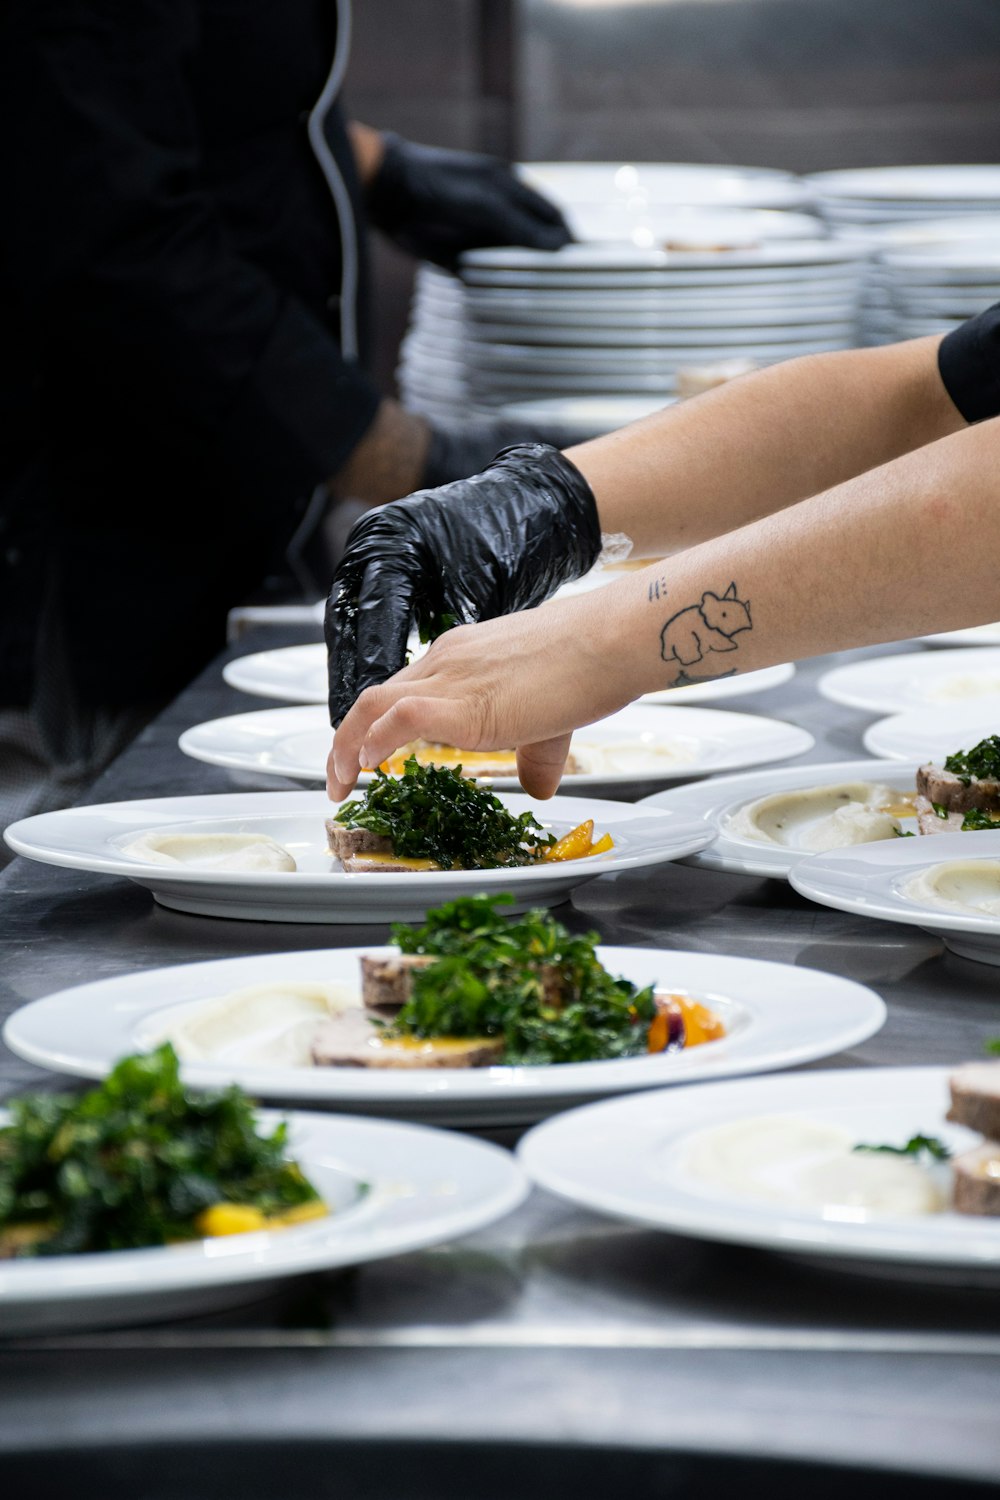 a person in black gloves putting food on a plate